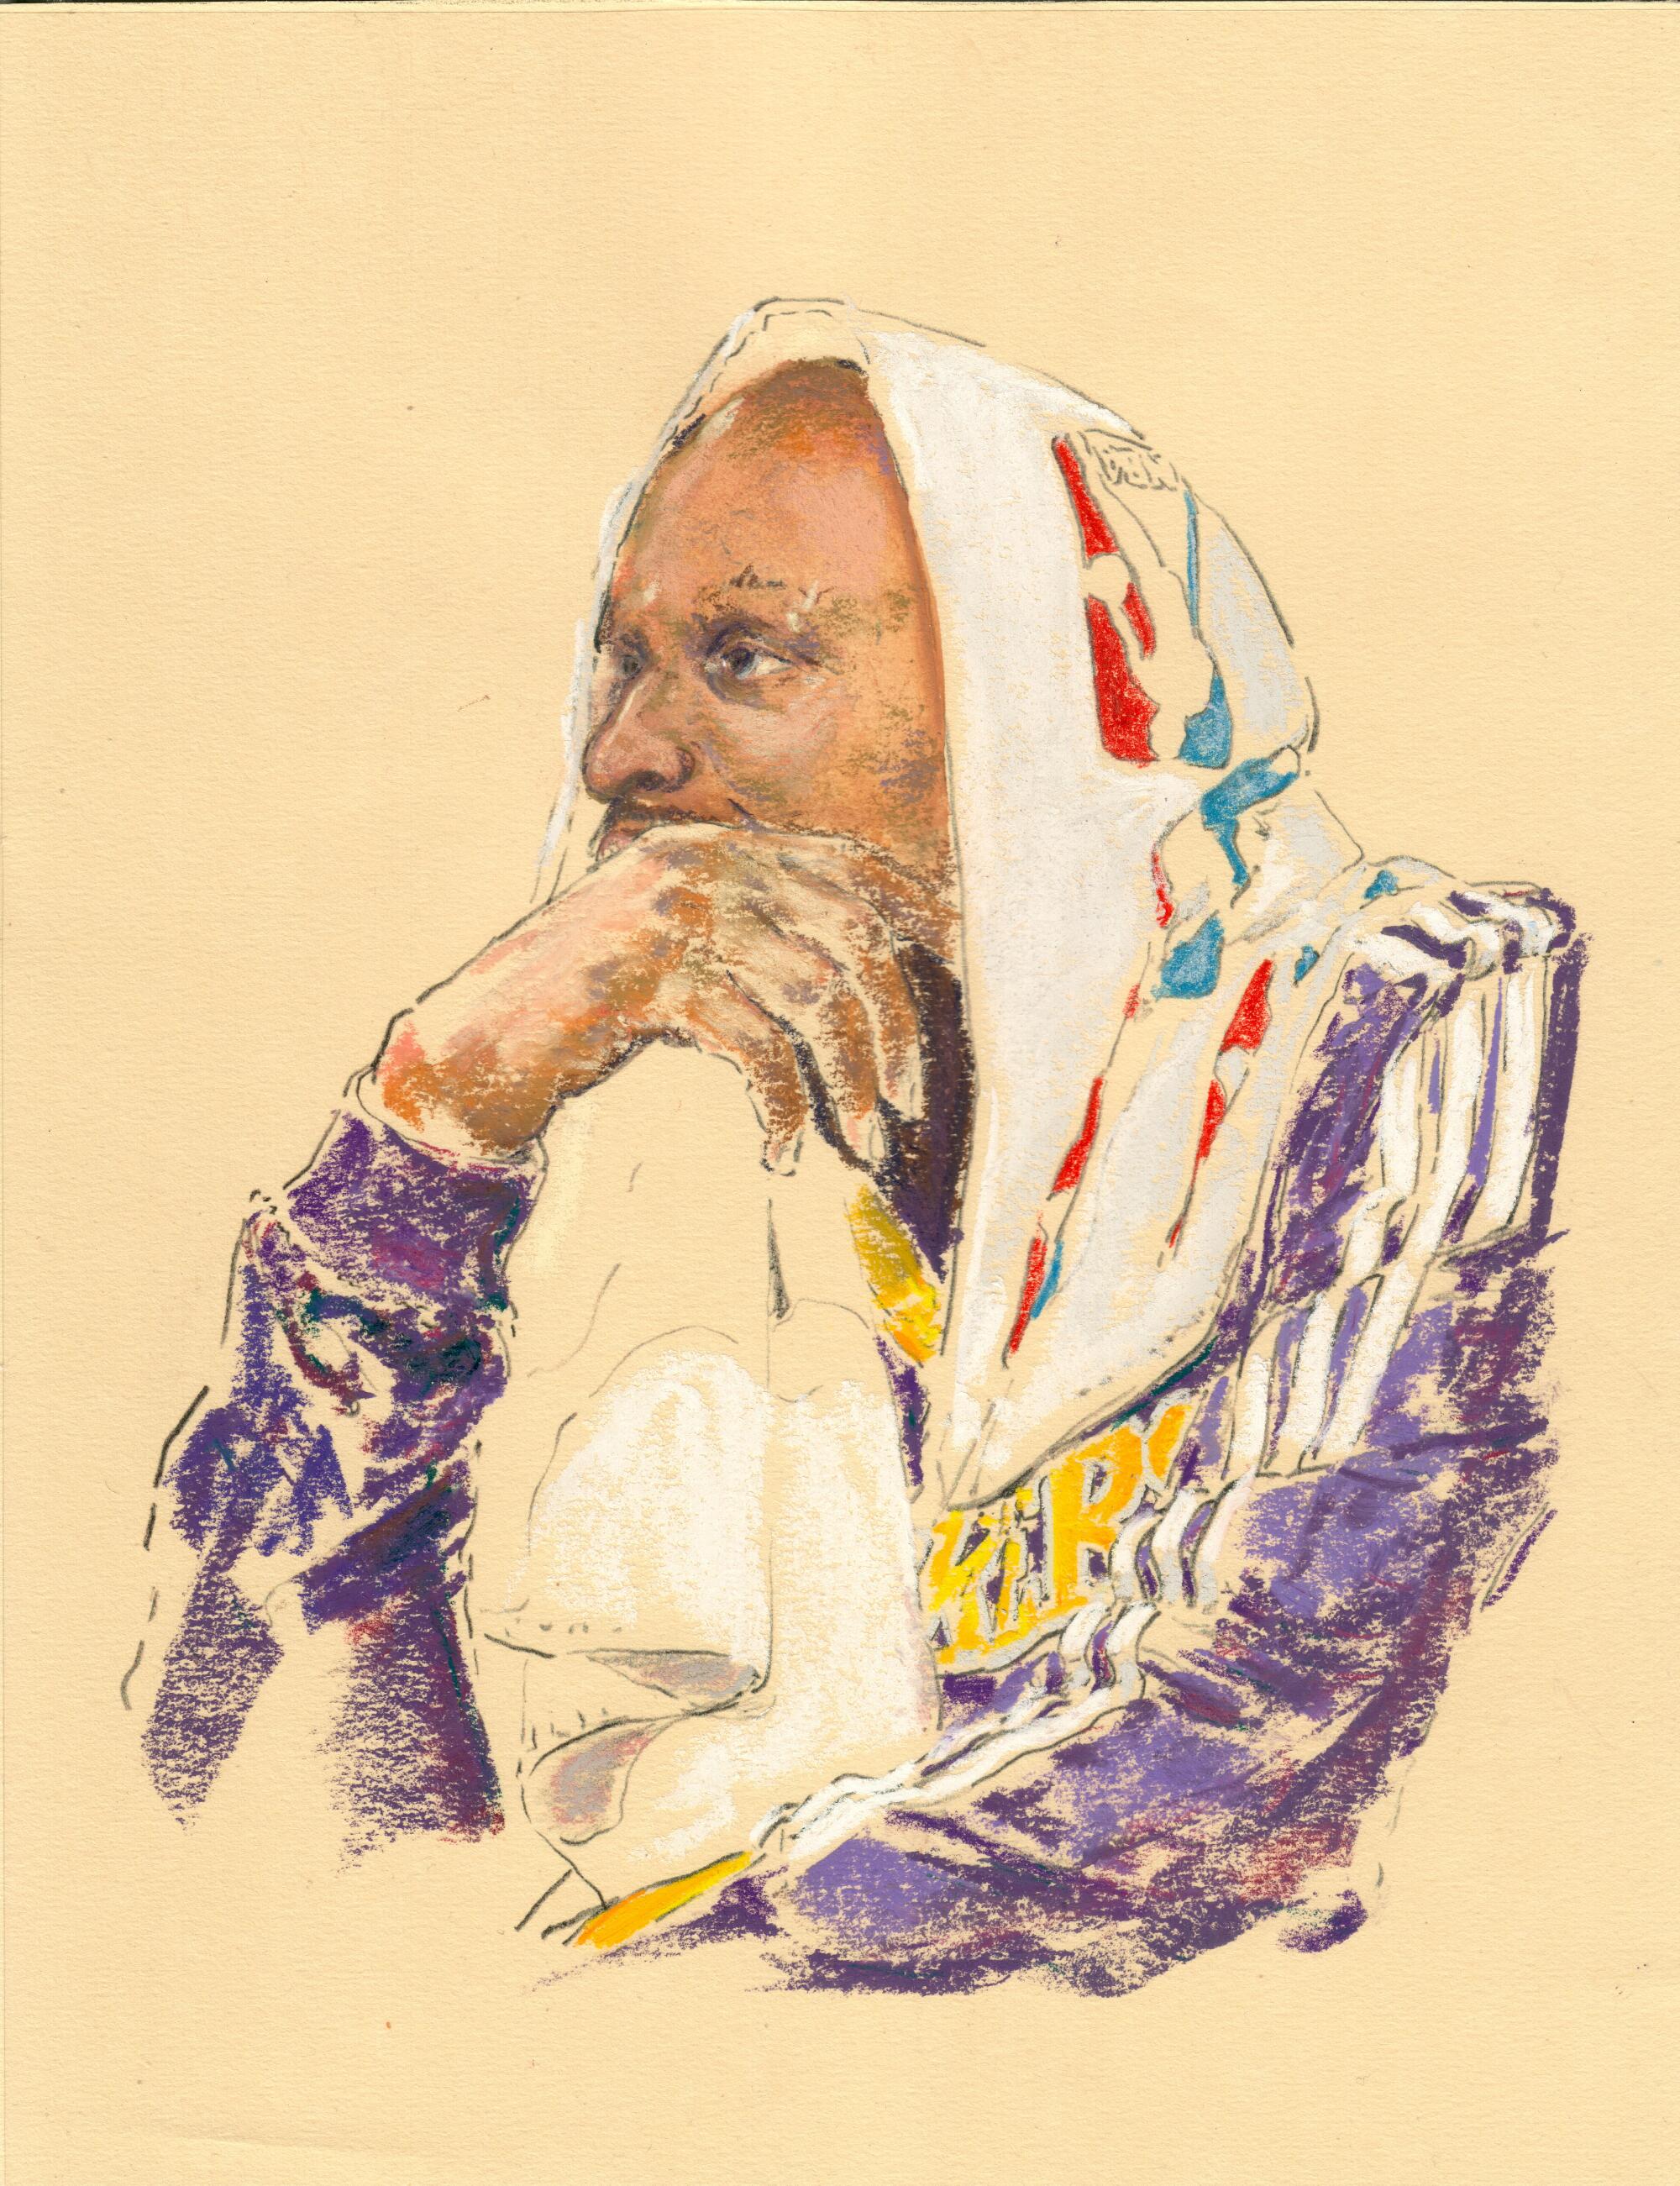 Drawing of Lakers player looking on from the bench, a towel draped over his head.